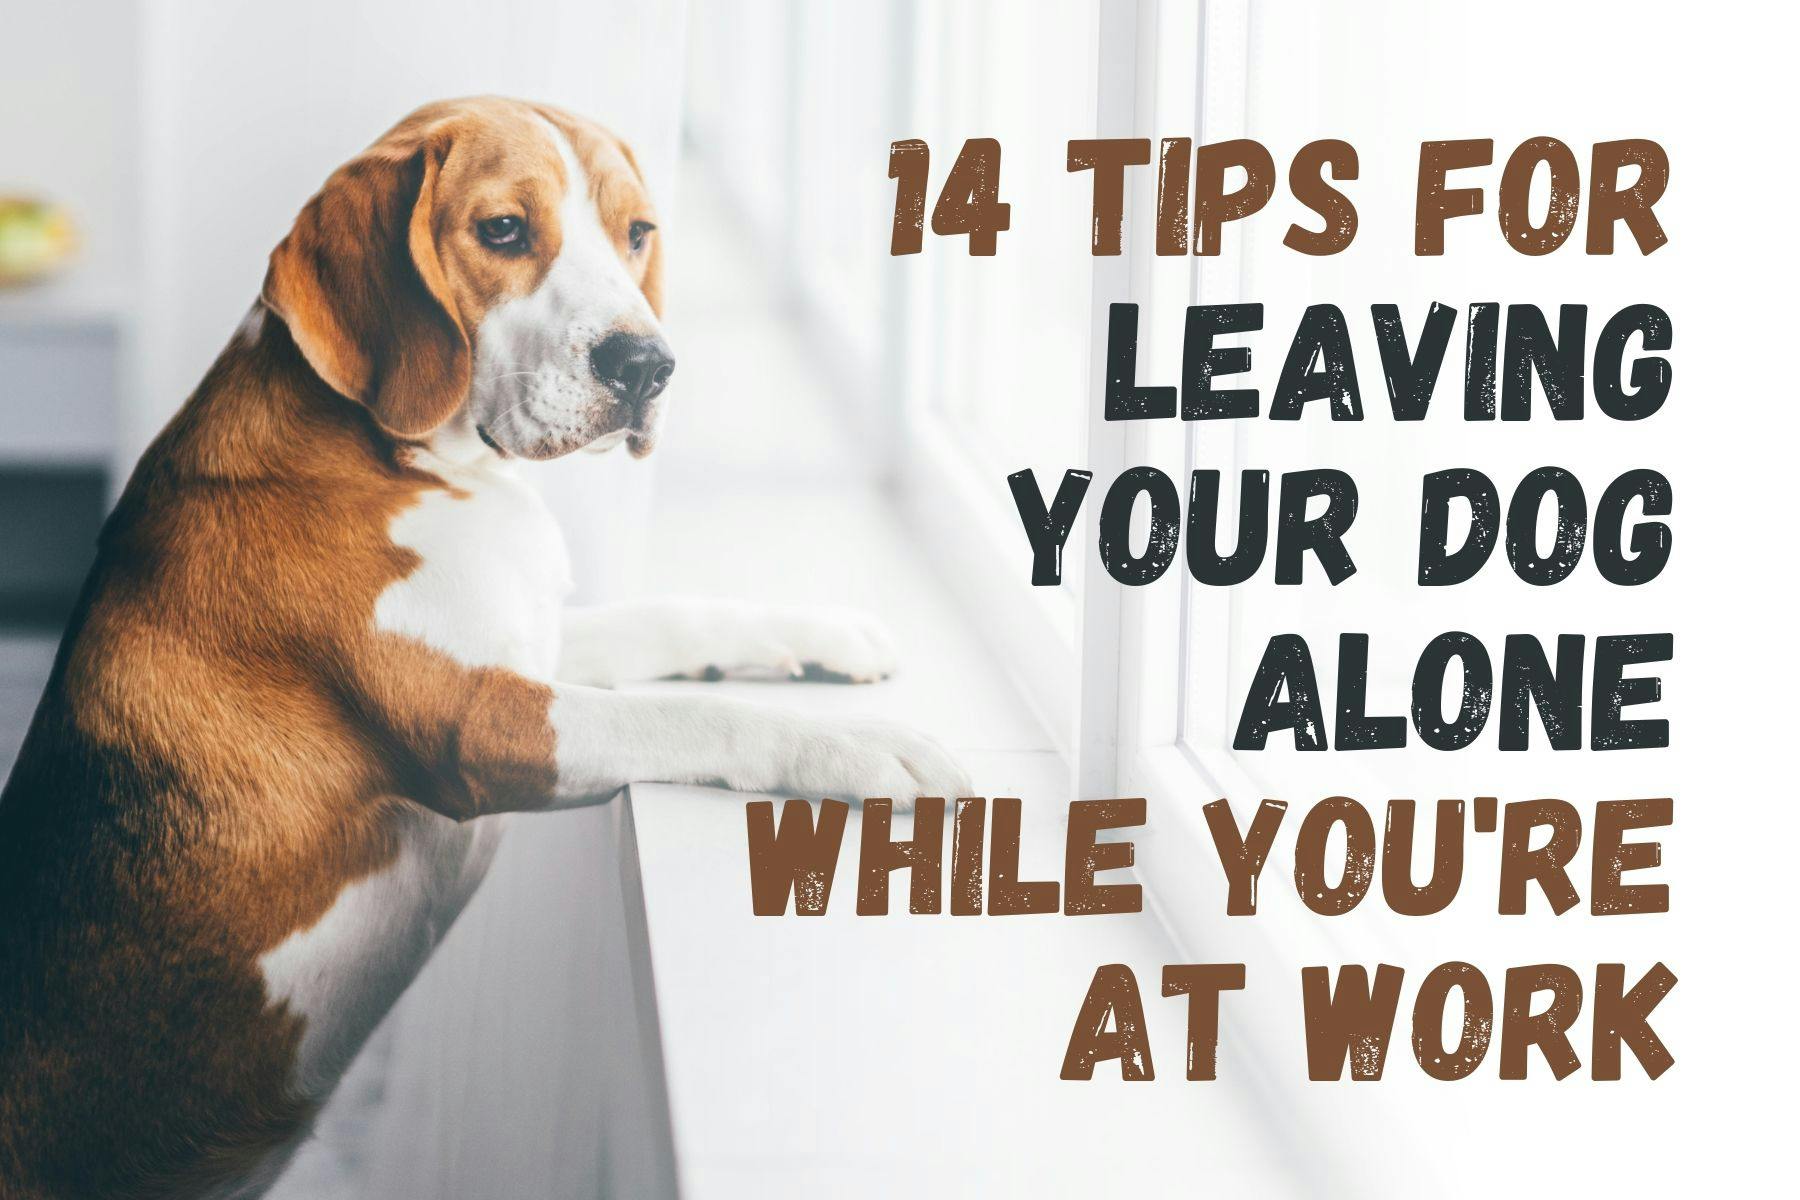 How to Leave Your Dog Alone at Home While You're Working: 14 Helpful Tips